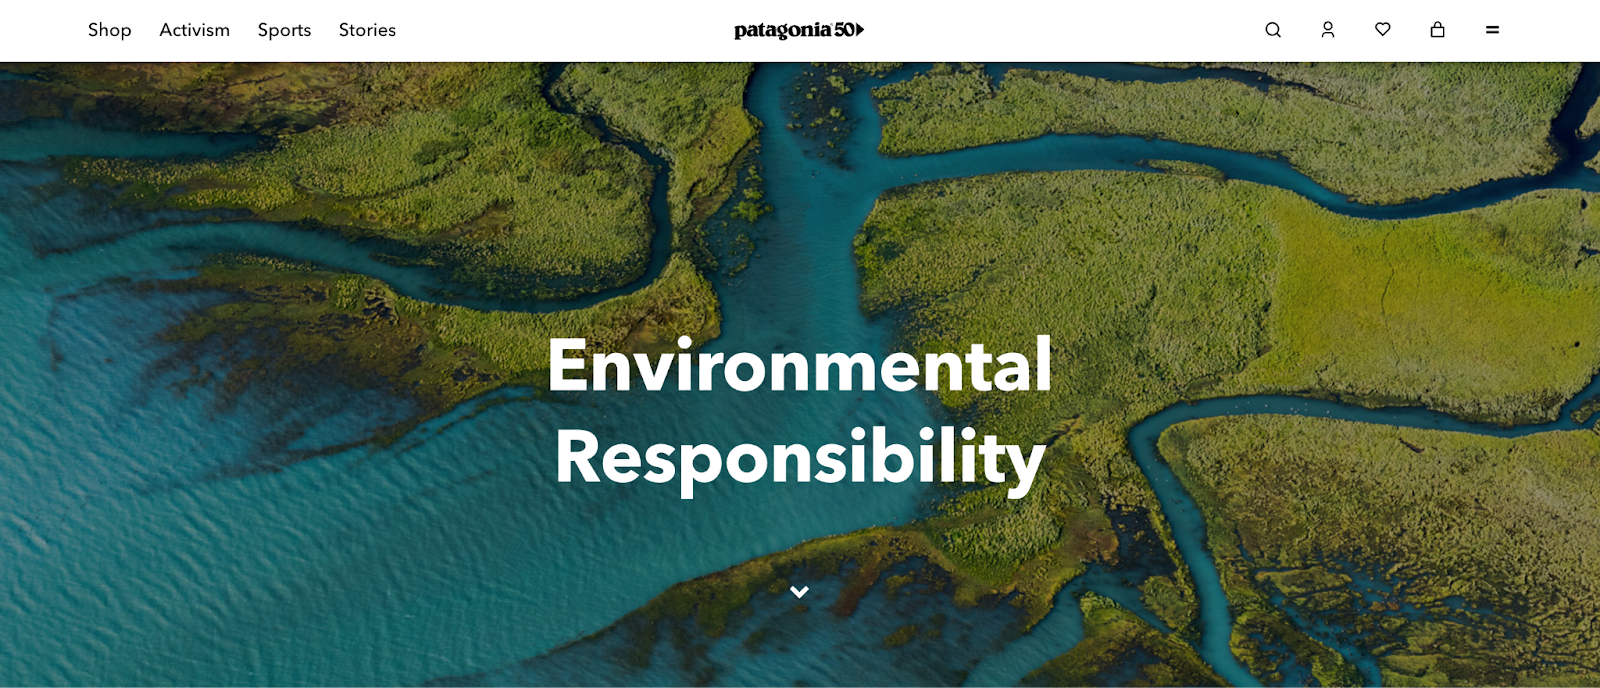 Screenshot from the environmental responsibility page of Patagonia's website